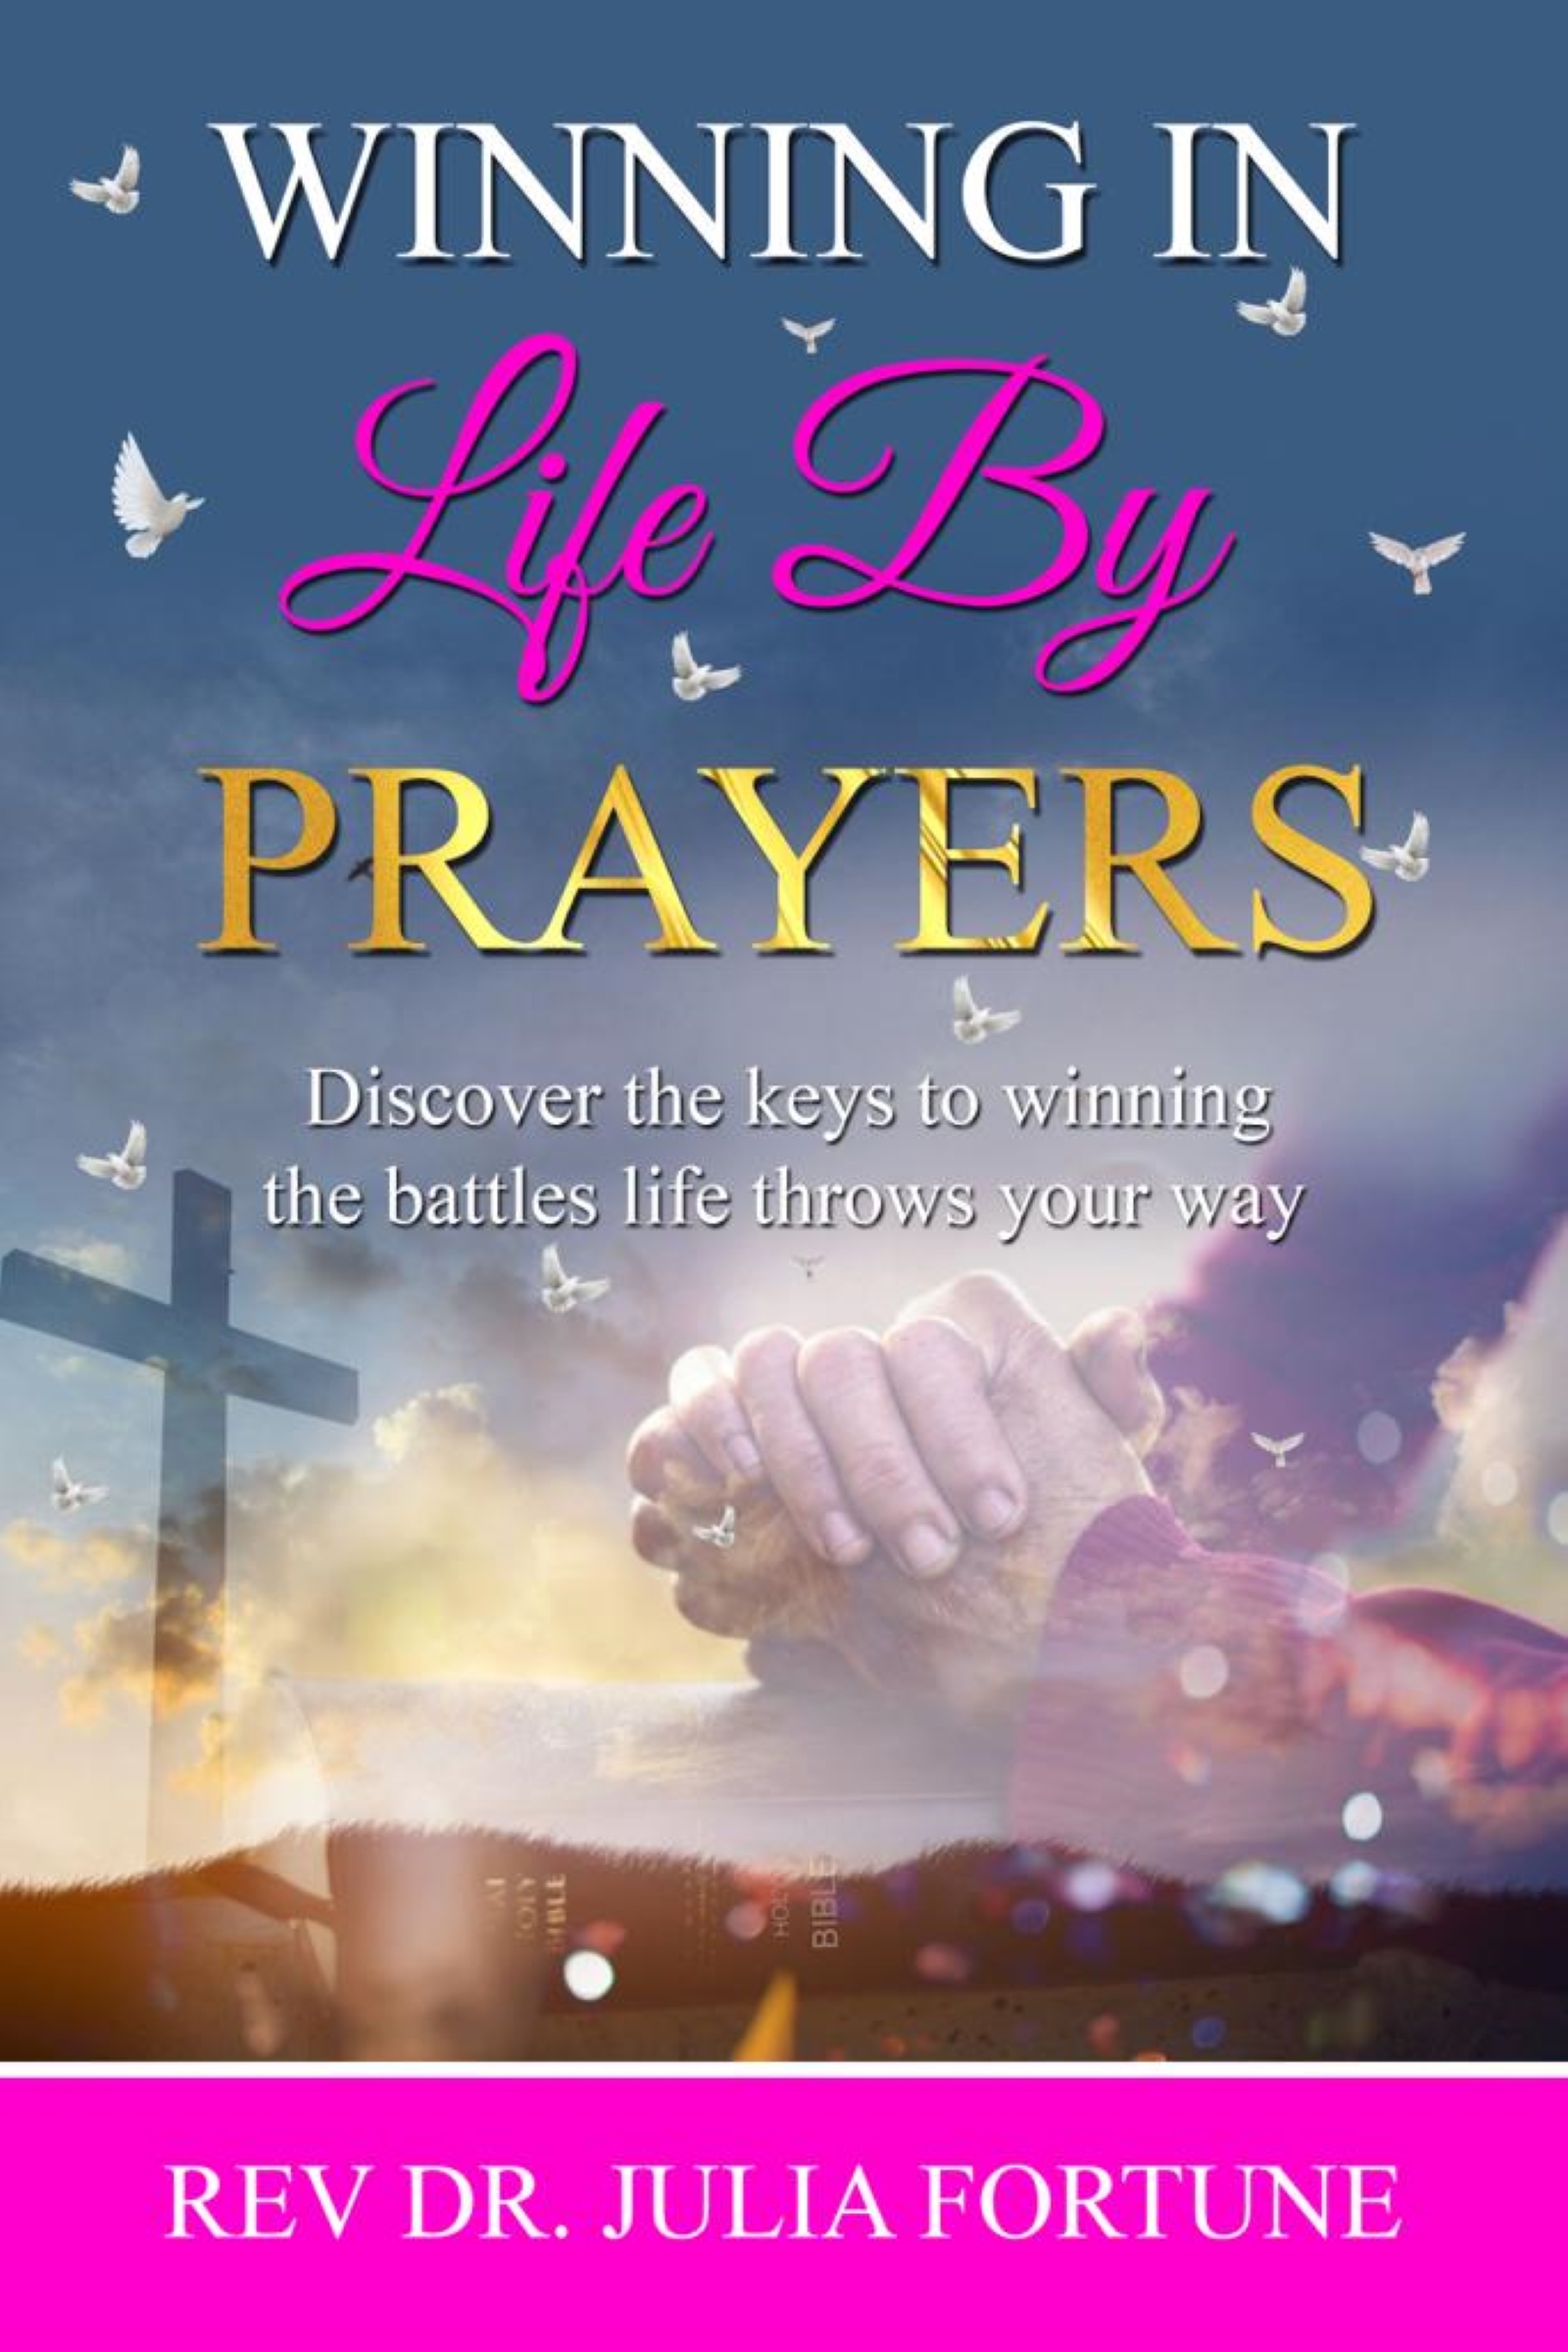 Winning-In-Life-By-Prayers--Discover-the-Keys-to-Winning-the-Battles-Life-Throws-your-Way